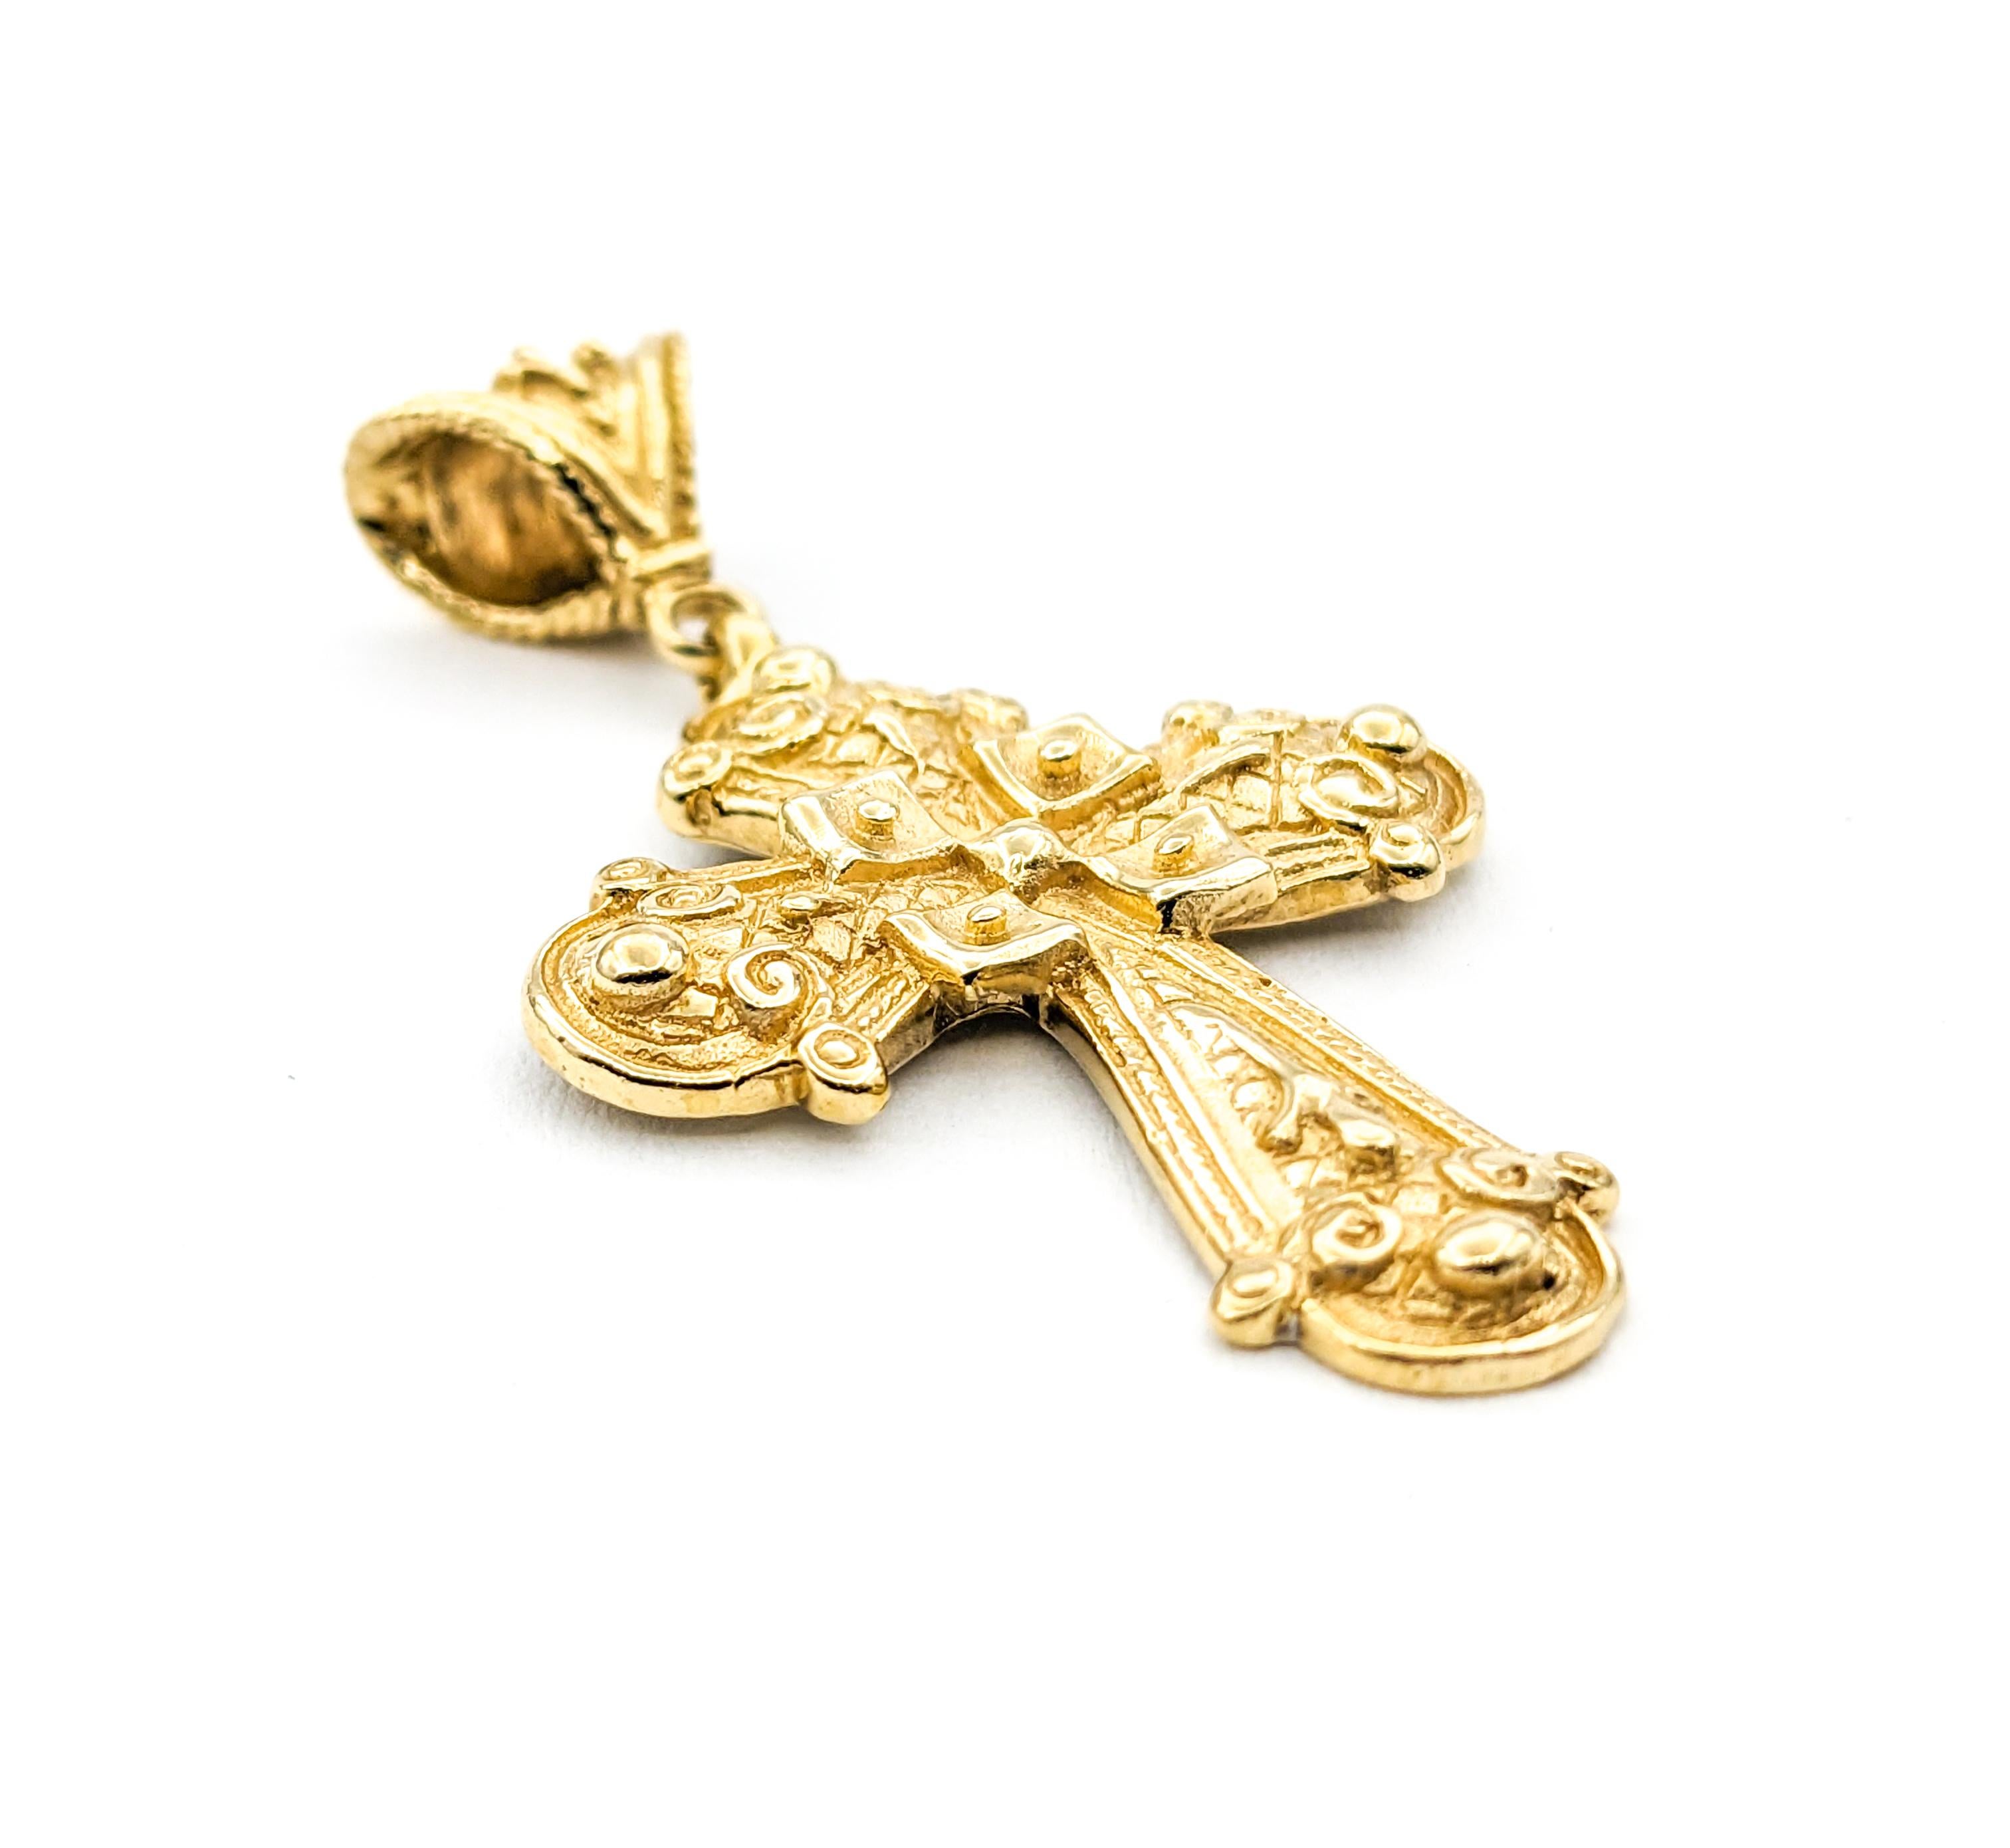 Cross Pendant In Yellow Gold


Introducing our exquisite Gold Fashion Pendant, intricately crafted in 14kt yellow gold. This pendant features a beautifully detailed ornate cross design, showcasing the artistry and elegance of its creation. Measuring